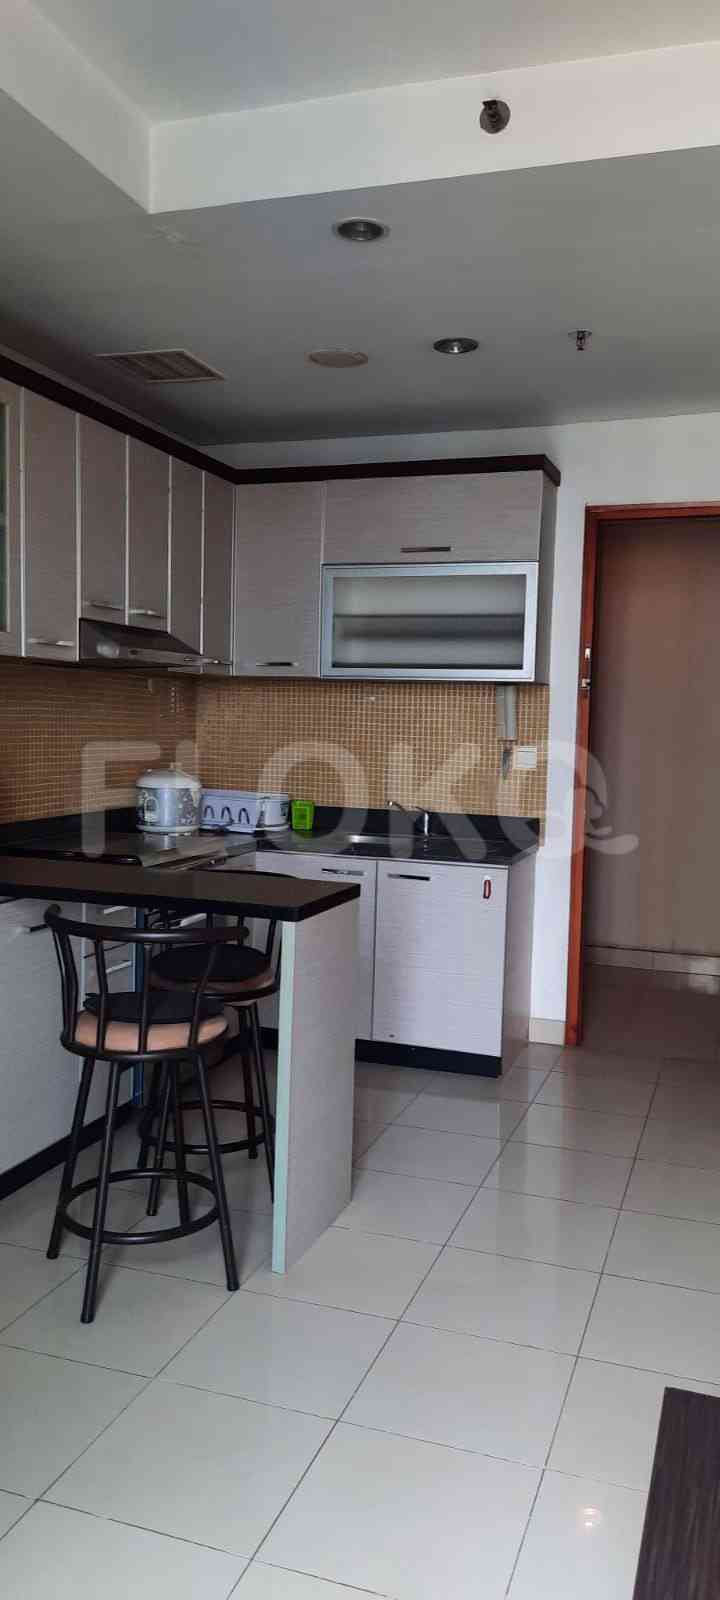 1 Bedroom on 15th Floor for Rent in Kuningan Place Apartment - fkud9c 3